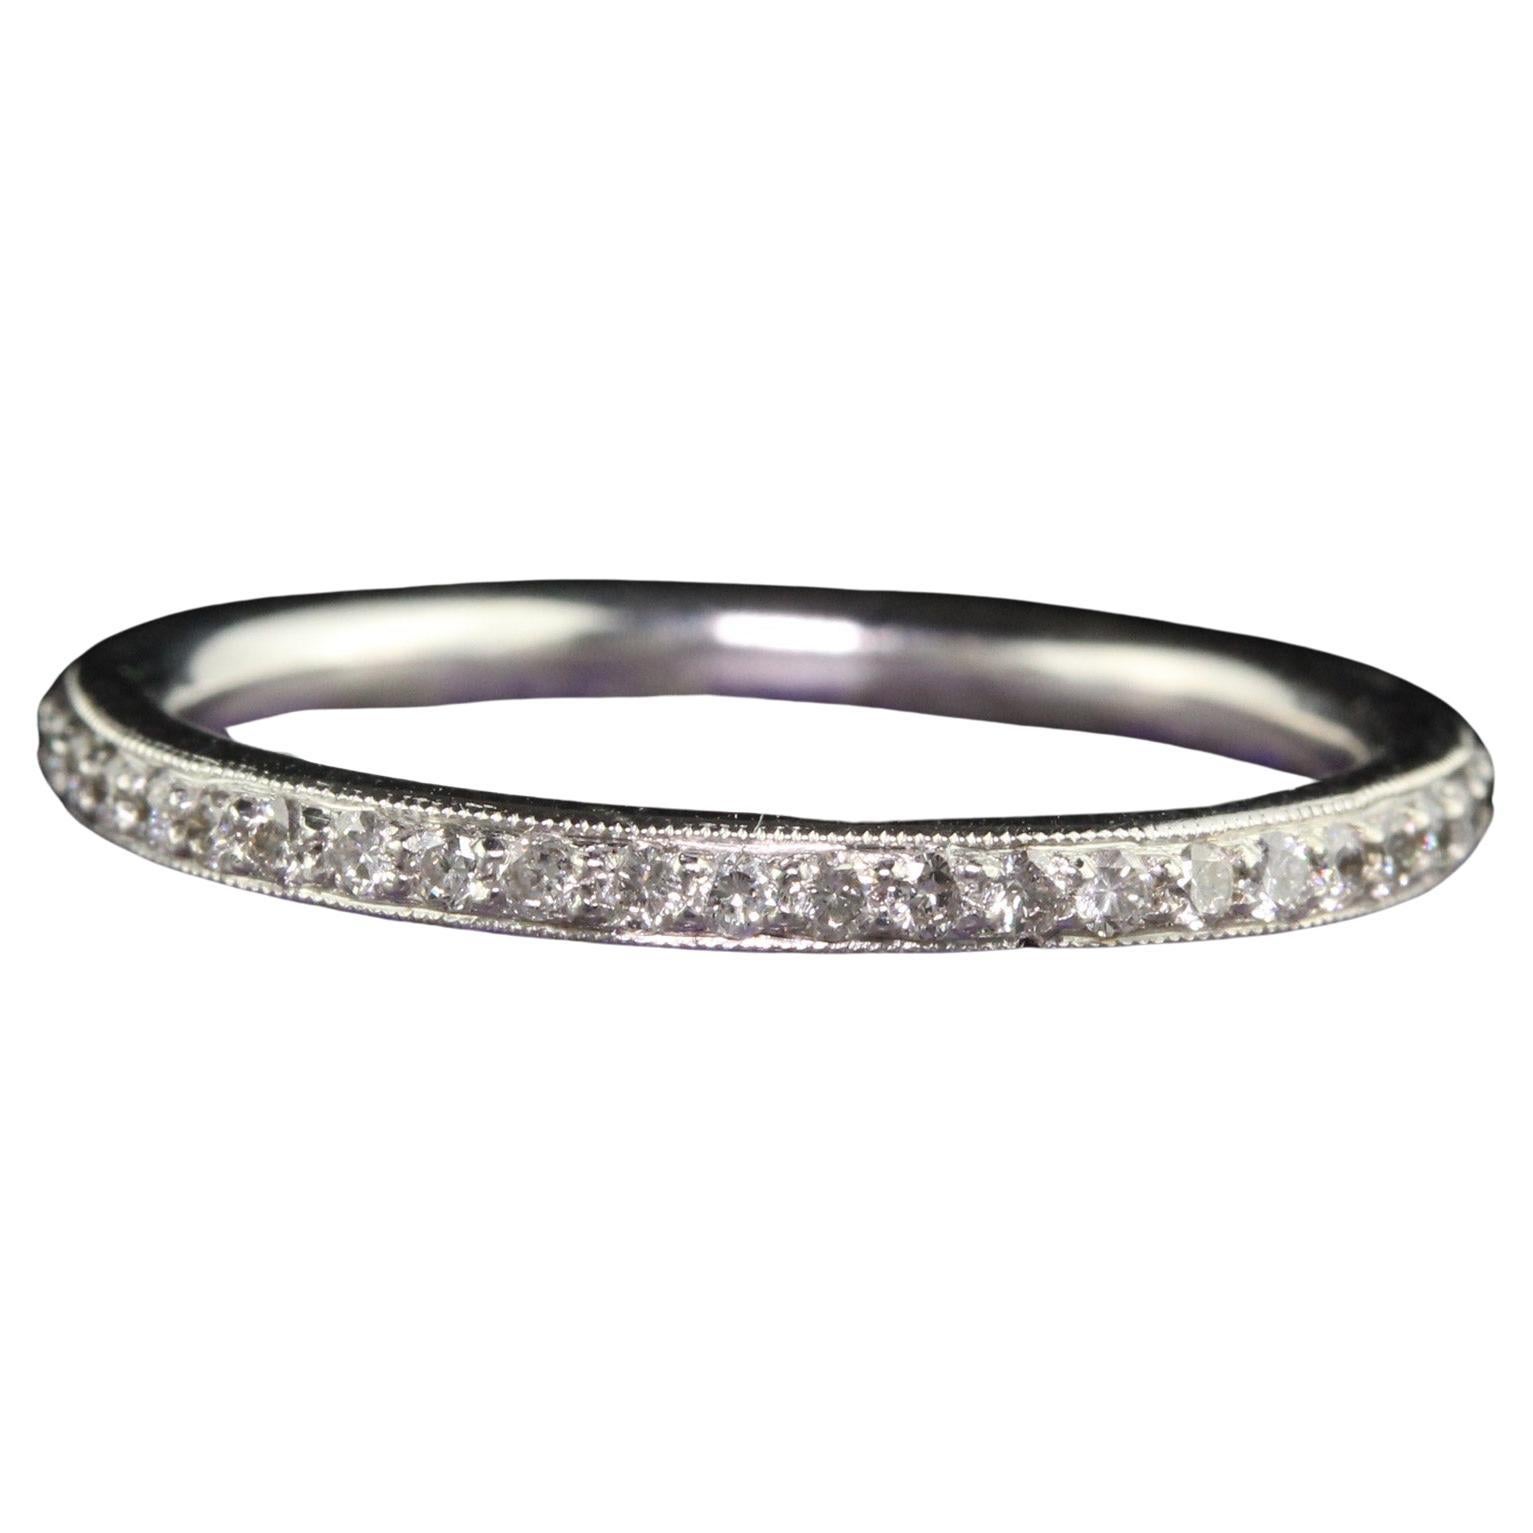 Vintage 18K White Gold Round Cut Eternity Wedding Band - Size 7 For Sale